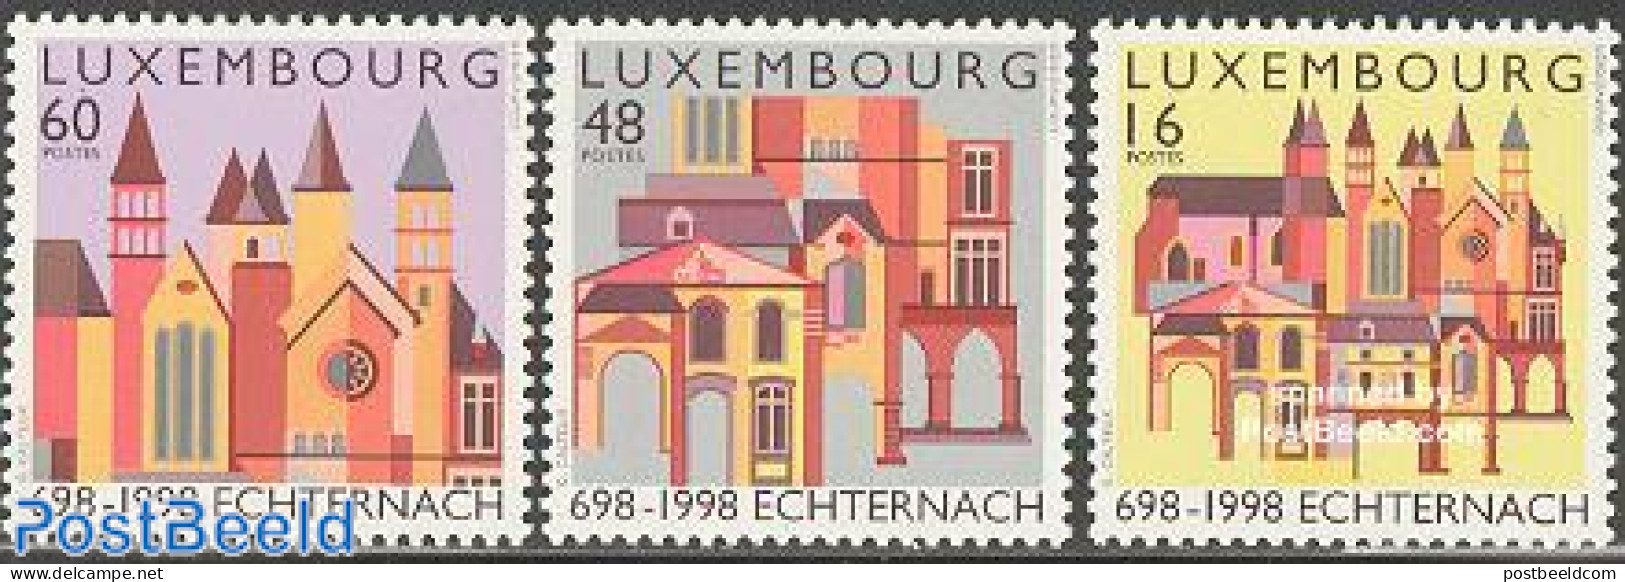 Luxemburg 1998 Echternach Abbey 3v, Mint NH, Religion - Cloisters & Abbeys - Unused Stamps